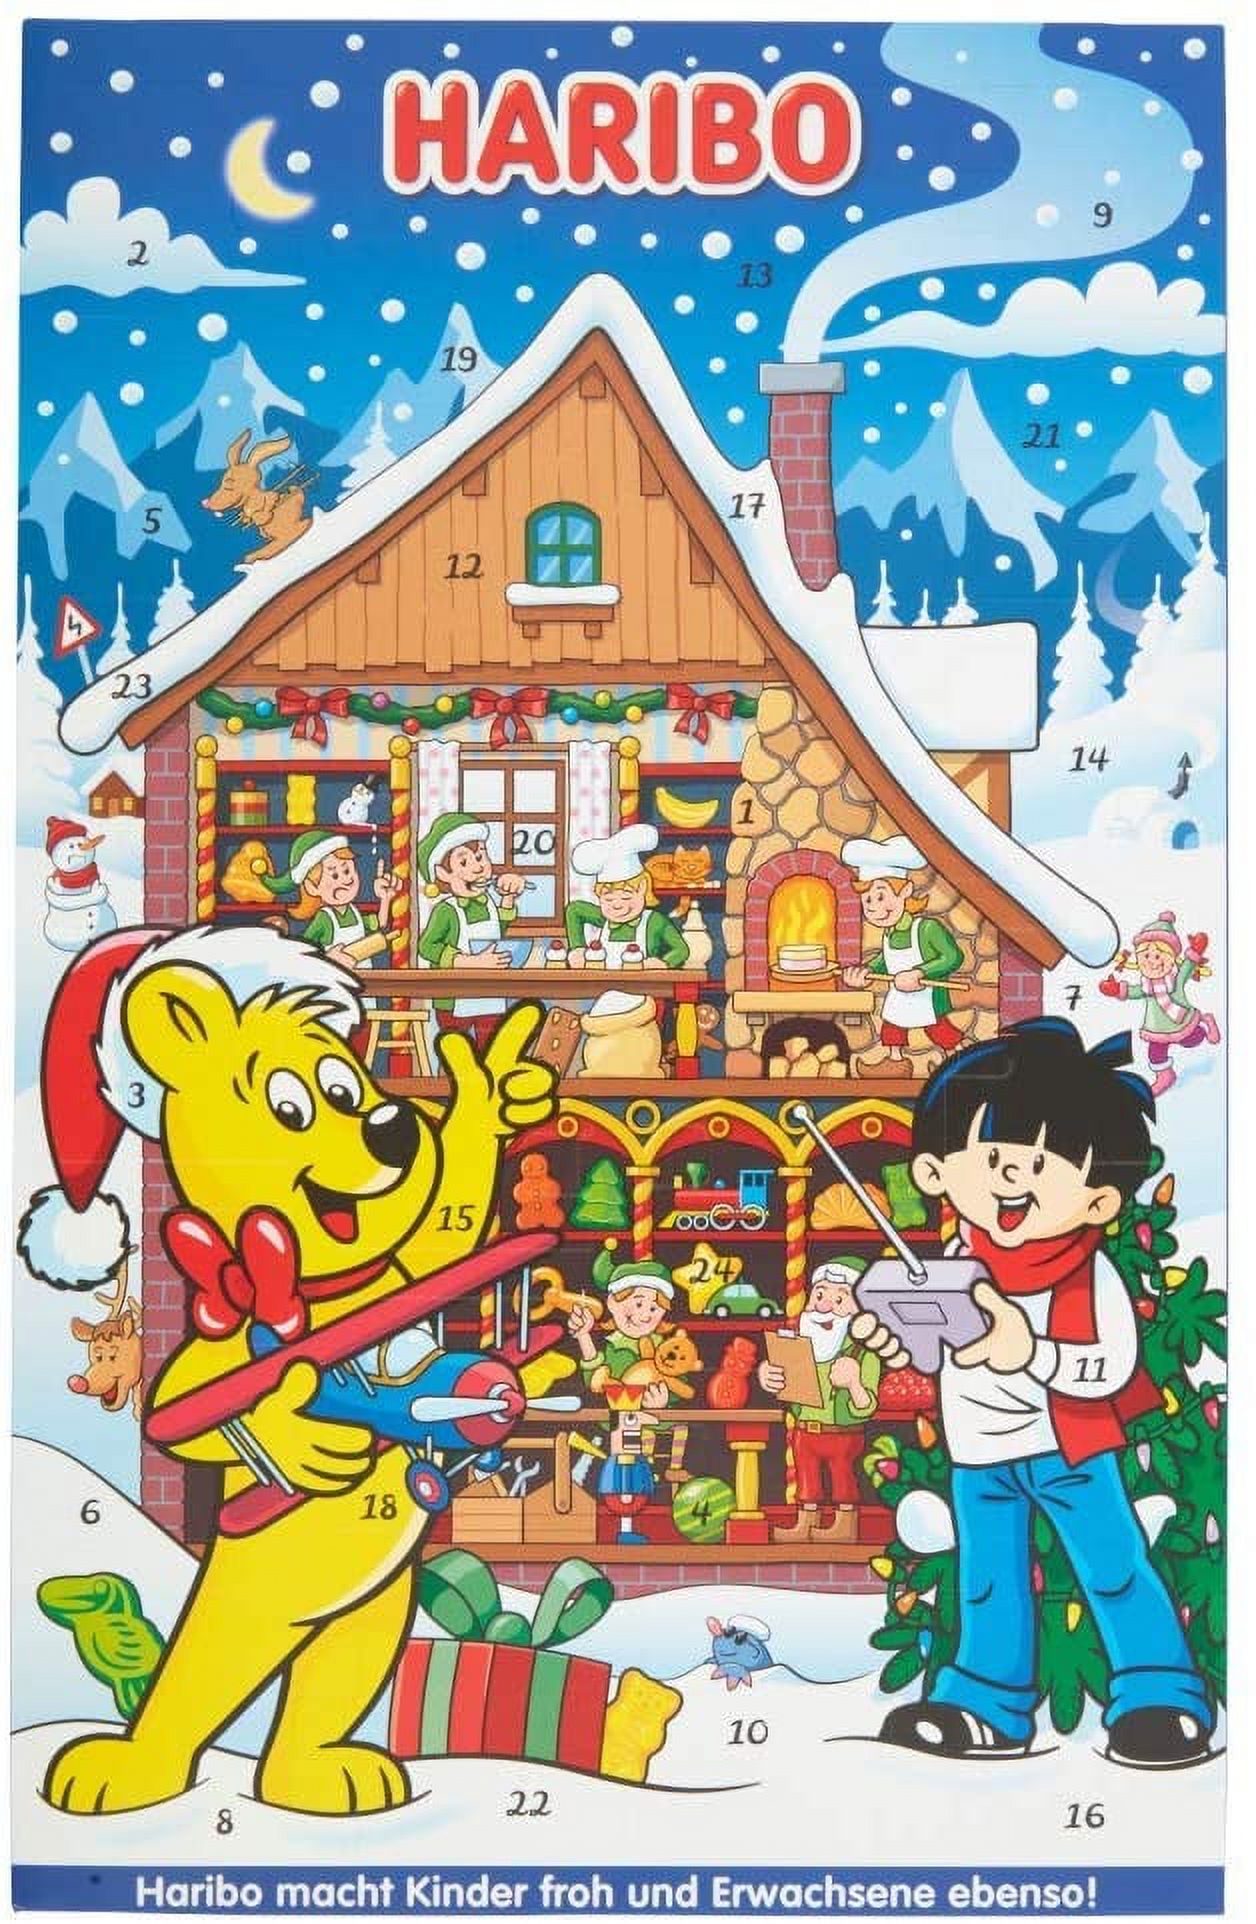 Advent Calendar (Haribo) Advent Calendar, Christmas sweets gift, 300g - UK Import - Christmas Countdown for Kids and Adults - 2-3 Days Delivery - image 5 of 5